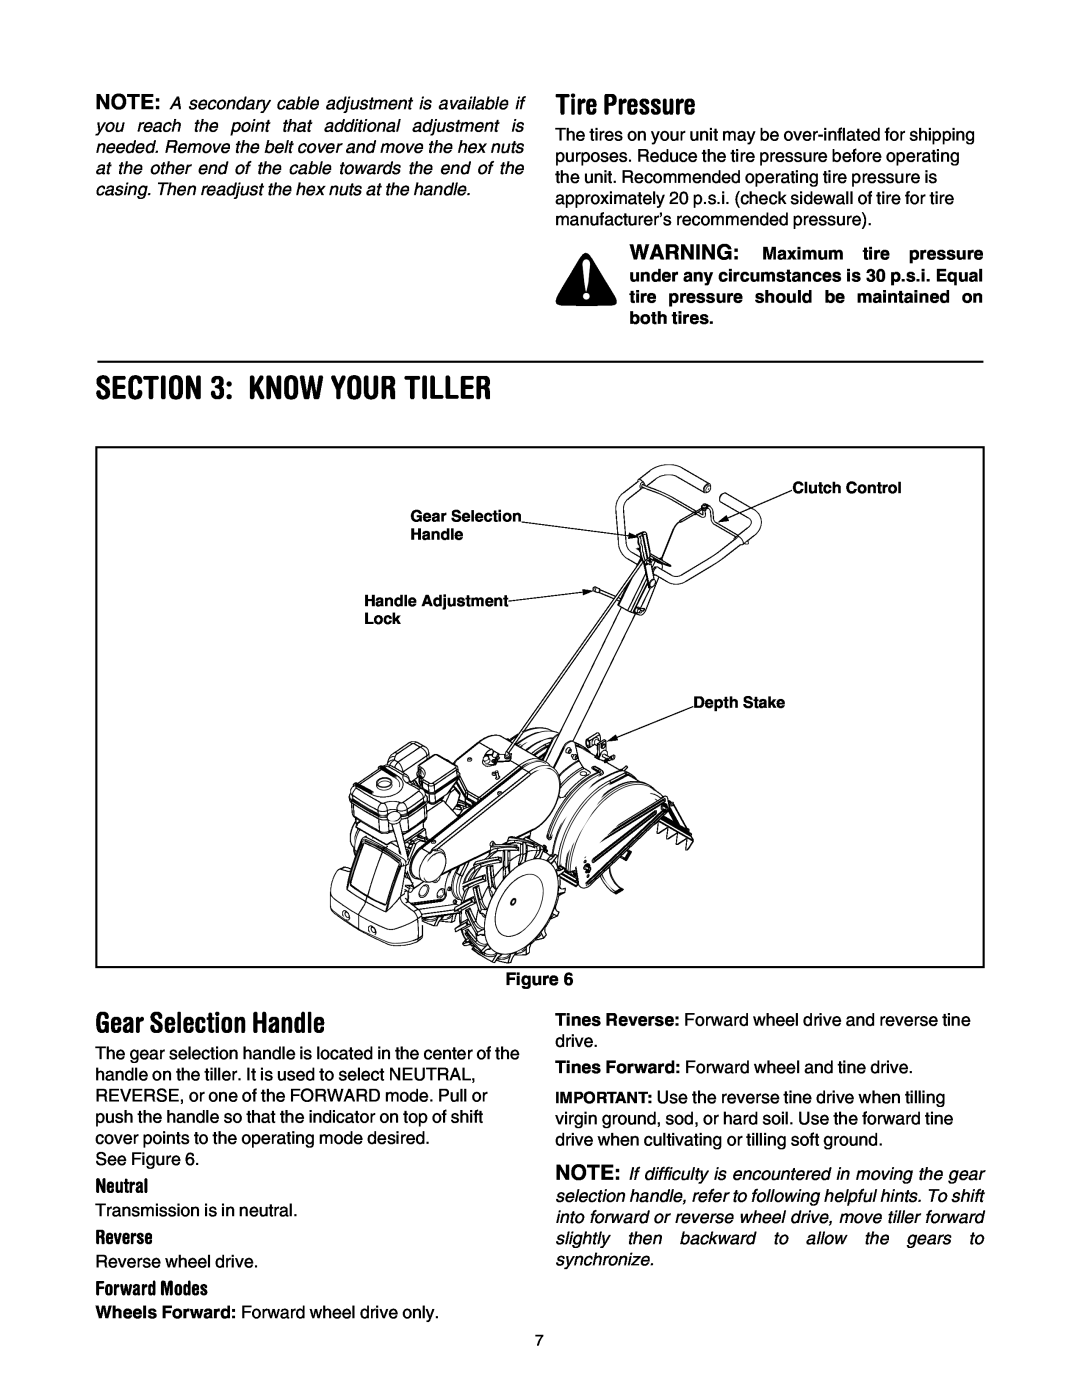 MTD 454 manual Know Your Tiller, Tire Pressure, Gear Selection Handle, Neutral, Reverse, Forward Modes 